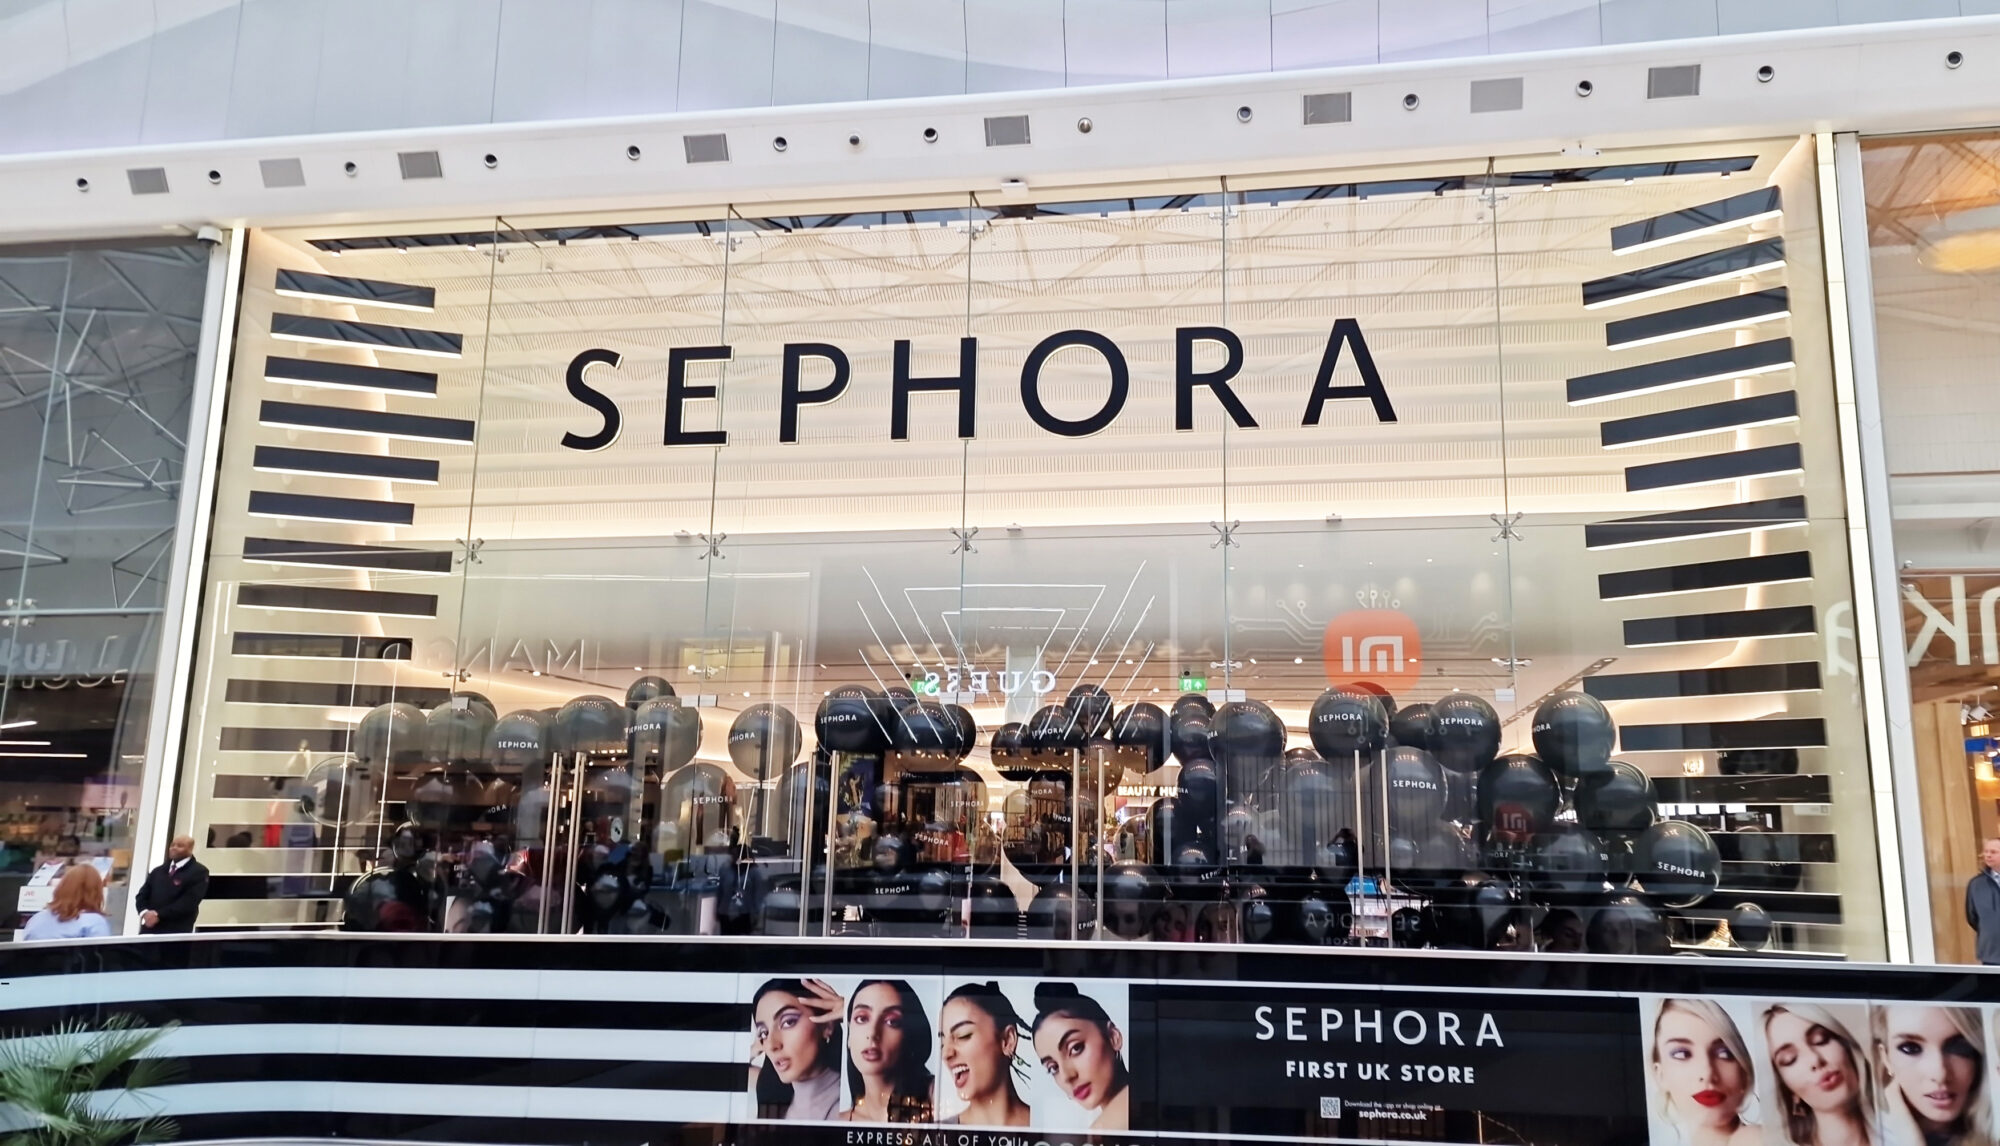 Architectural signs - Sephora